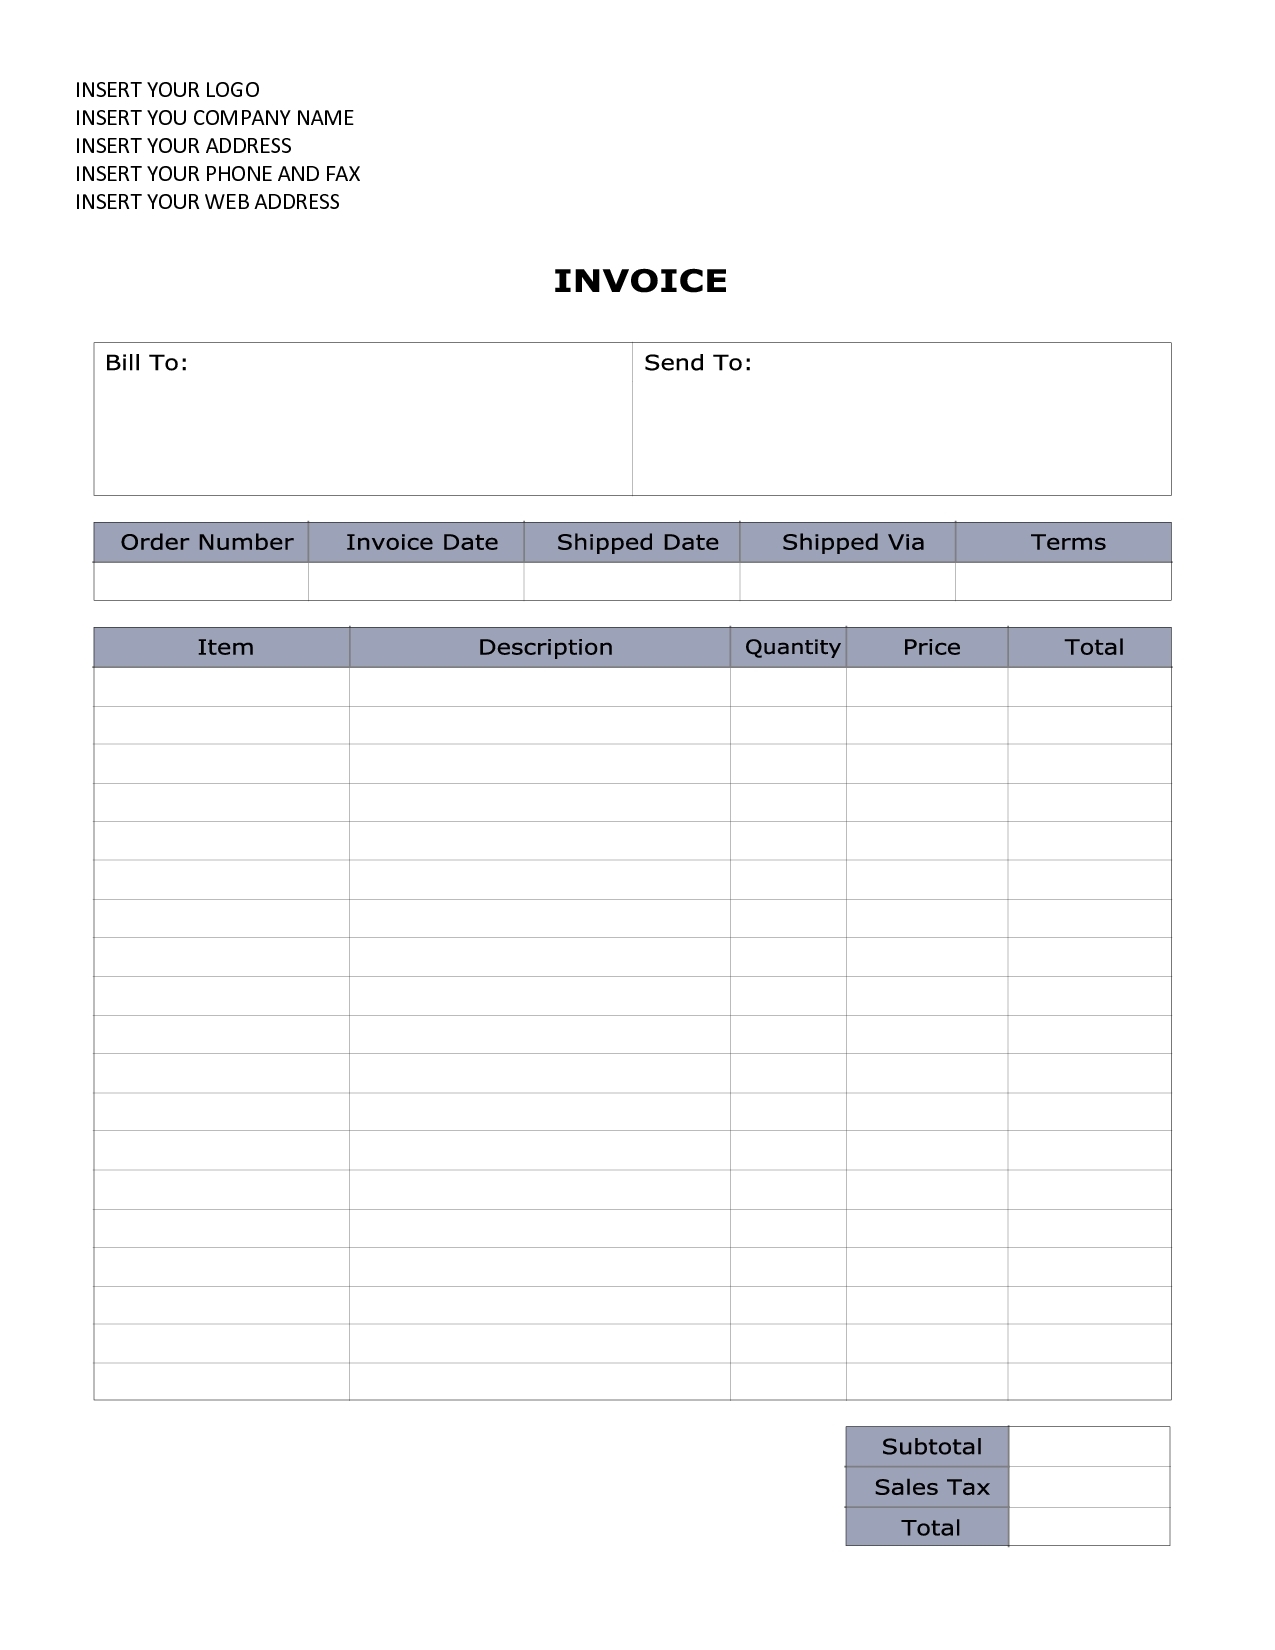 example invoice word invoice template free 2016 invoice template word free